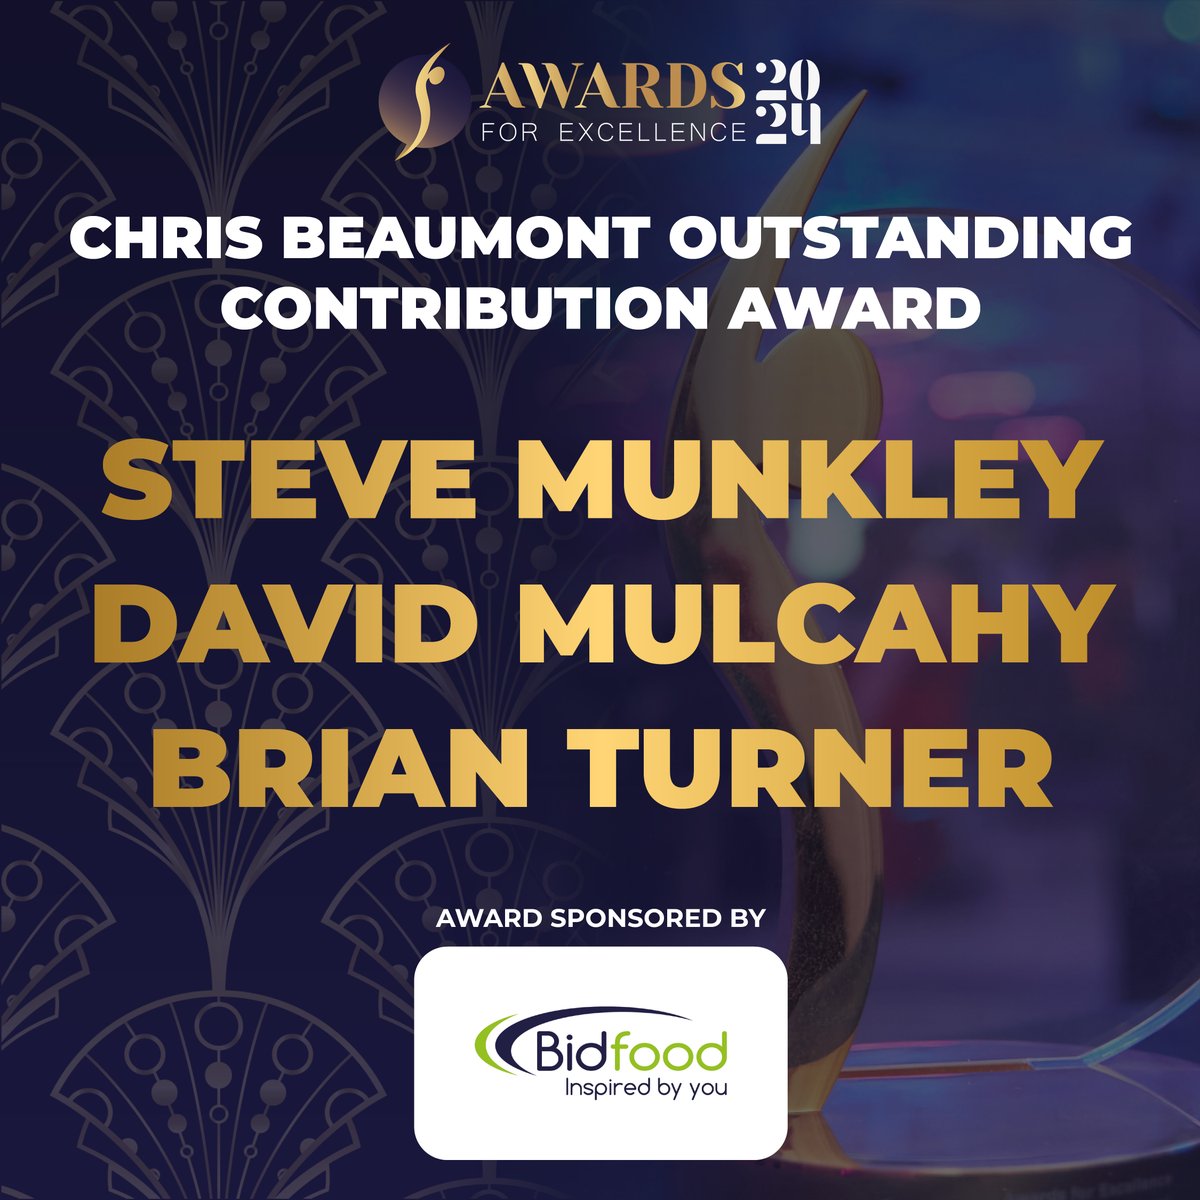 ✨ CHRIS BEAUMONT OUTSTANDING ACHIEVEMENT AWARD ✨

And the winner is…Brian Turner, David Mulcahy and Steve Munkley! 🏆

A huge congratulations and thank you to @BidfoodUK for sponsoring this Award 👏

#SpringboardAwards #Springboard #Hospitality